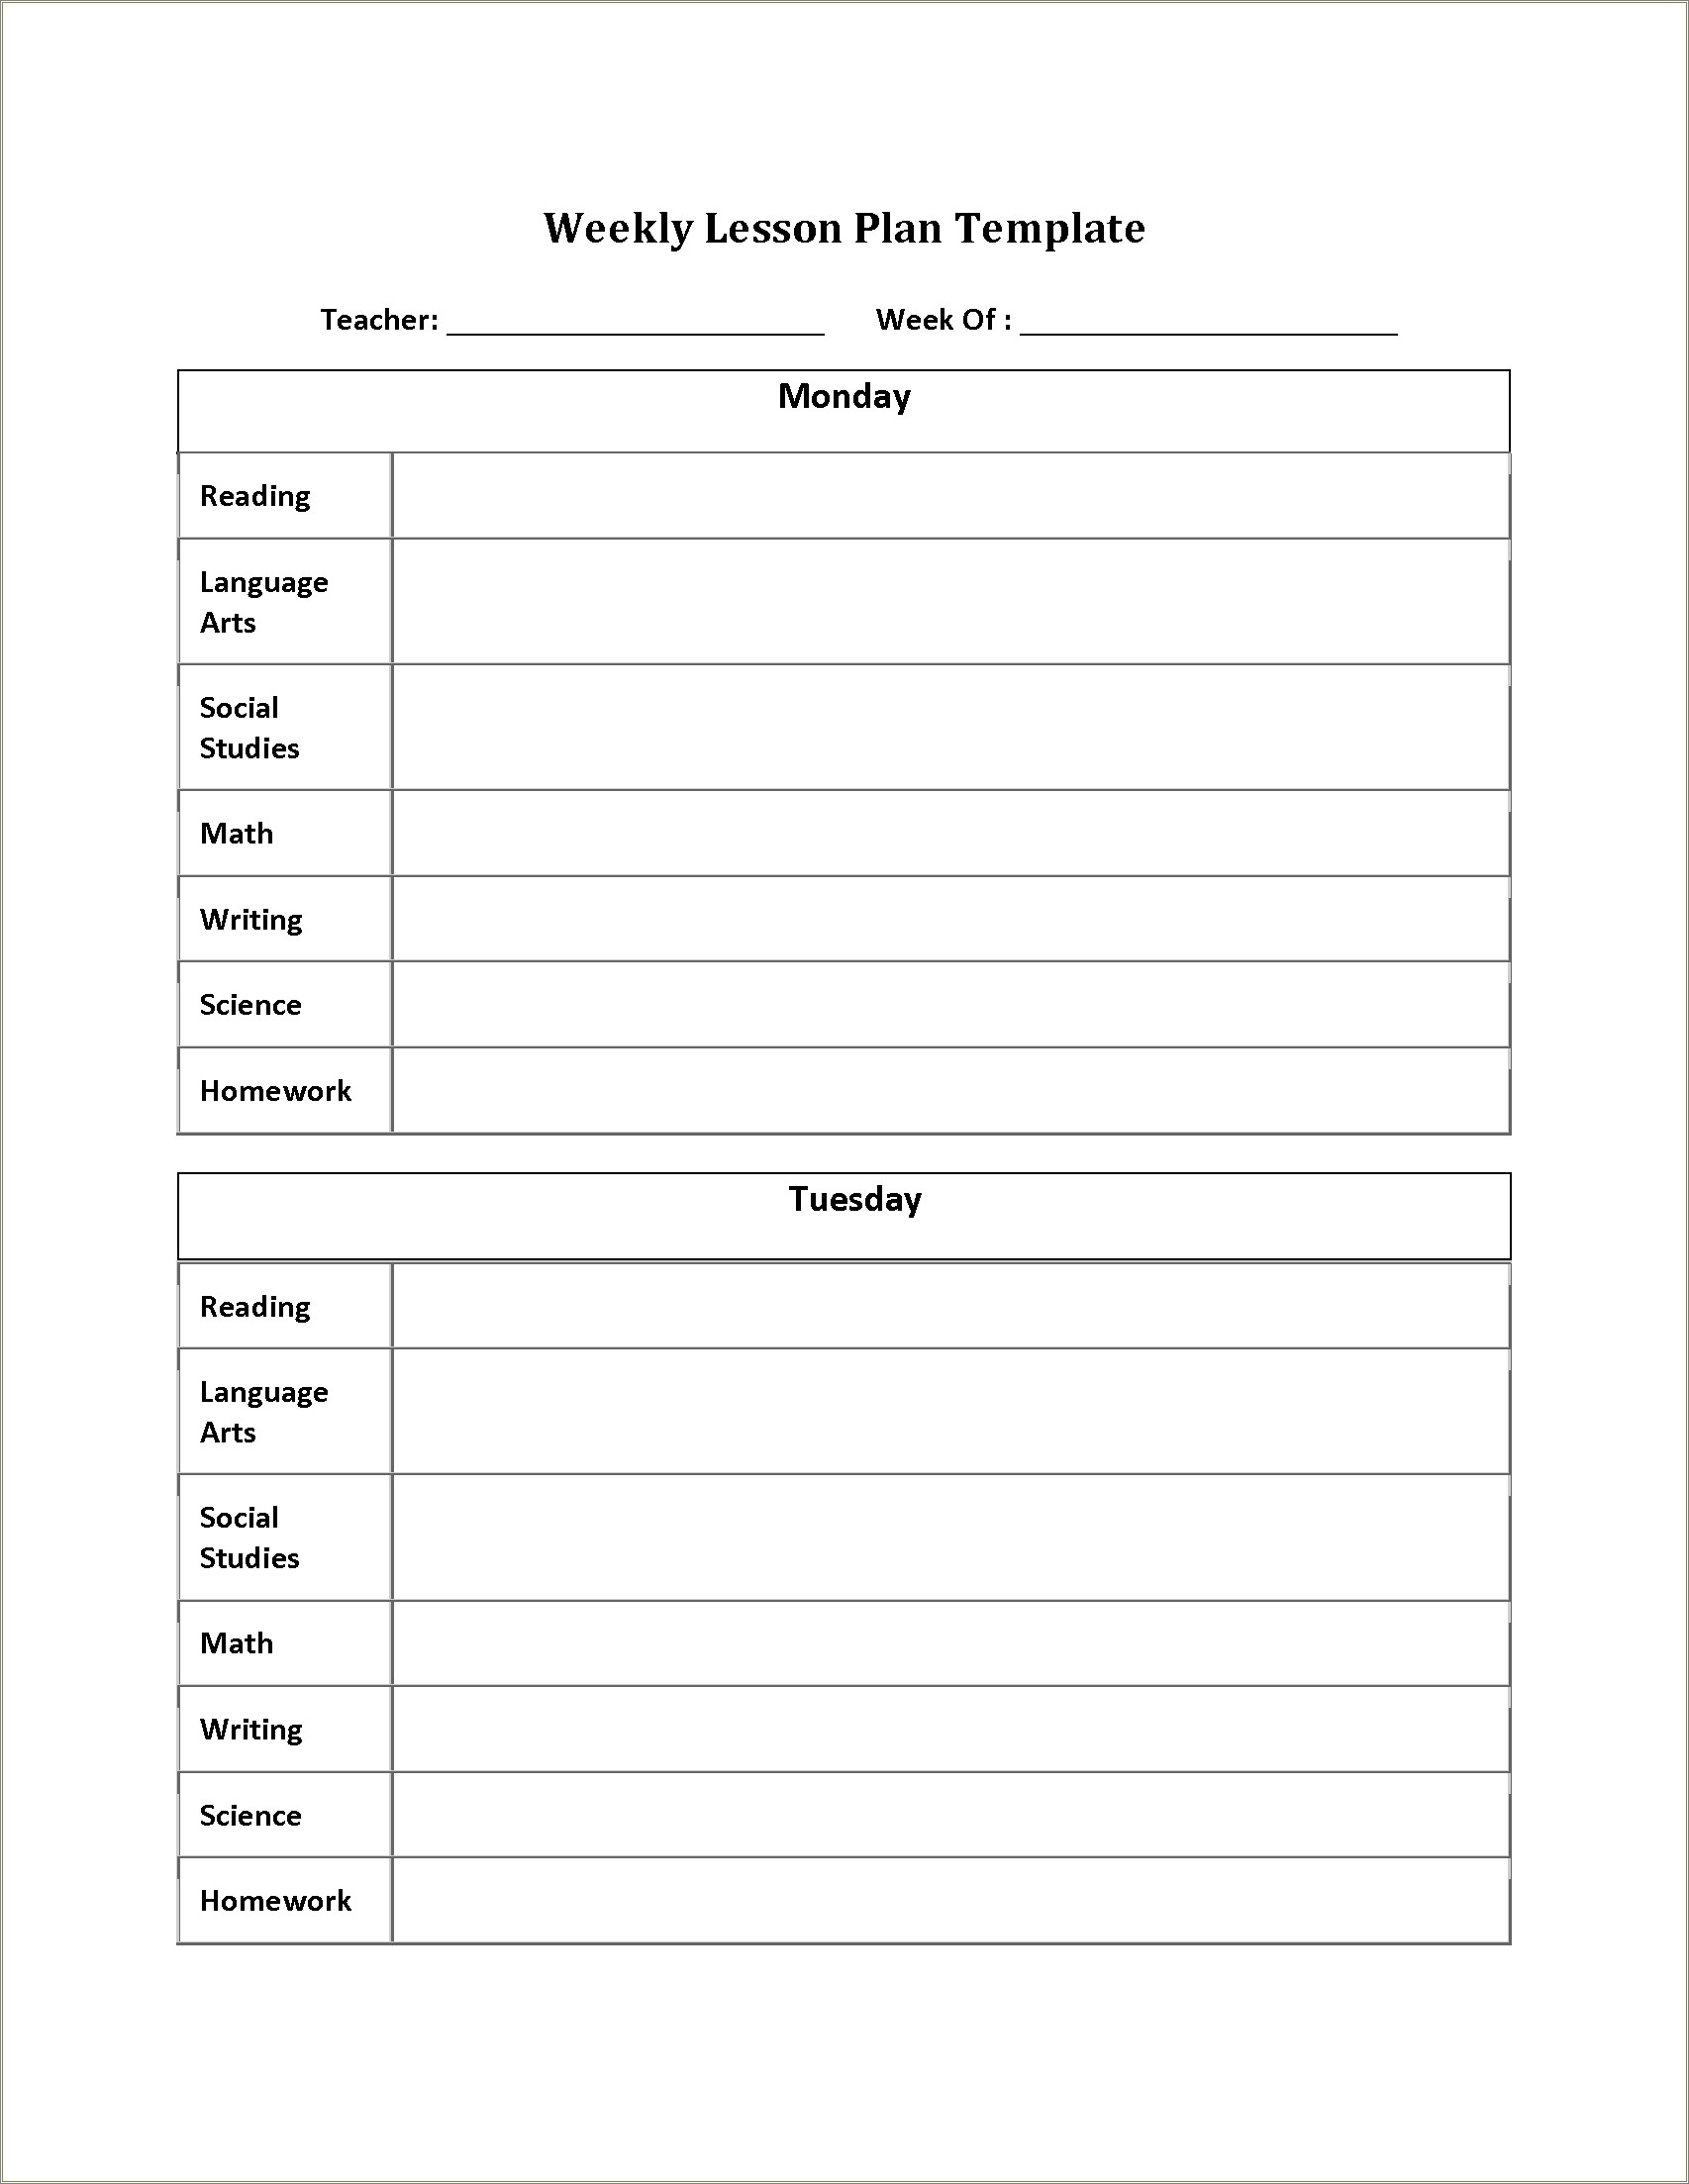 Free Weekly Lesson Plan Template For Teachers